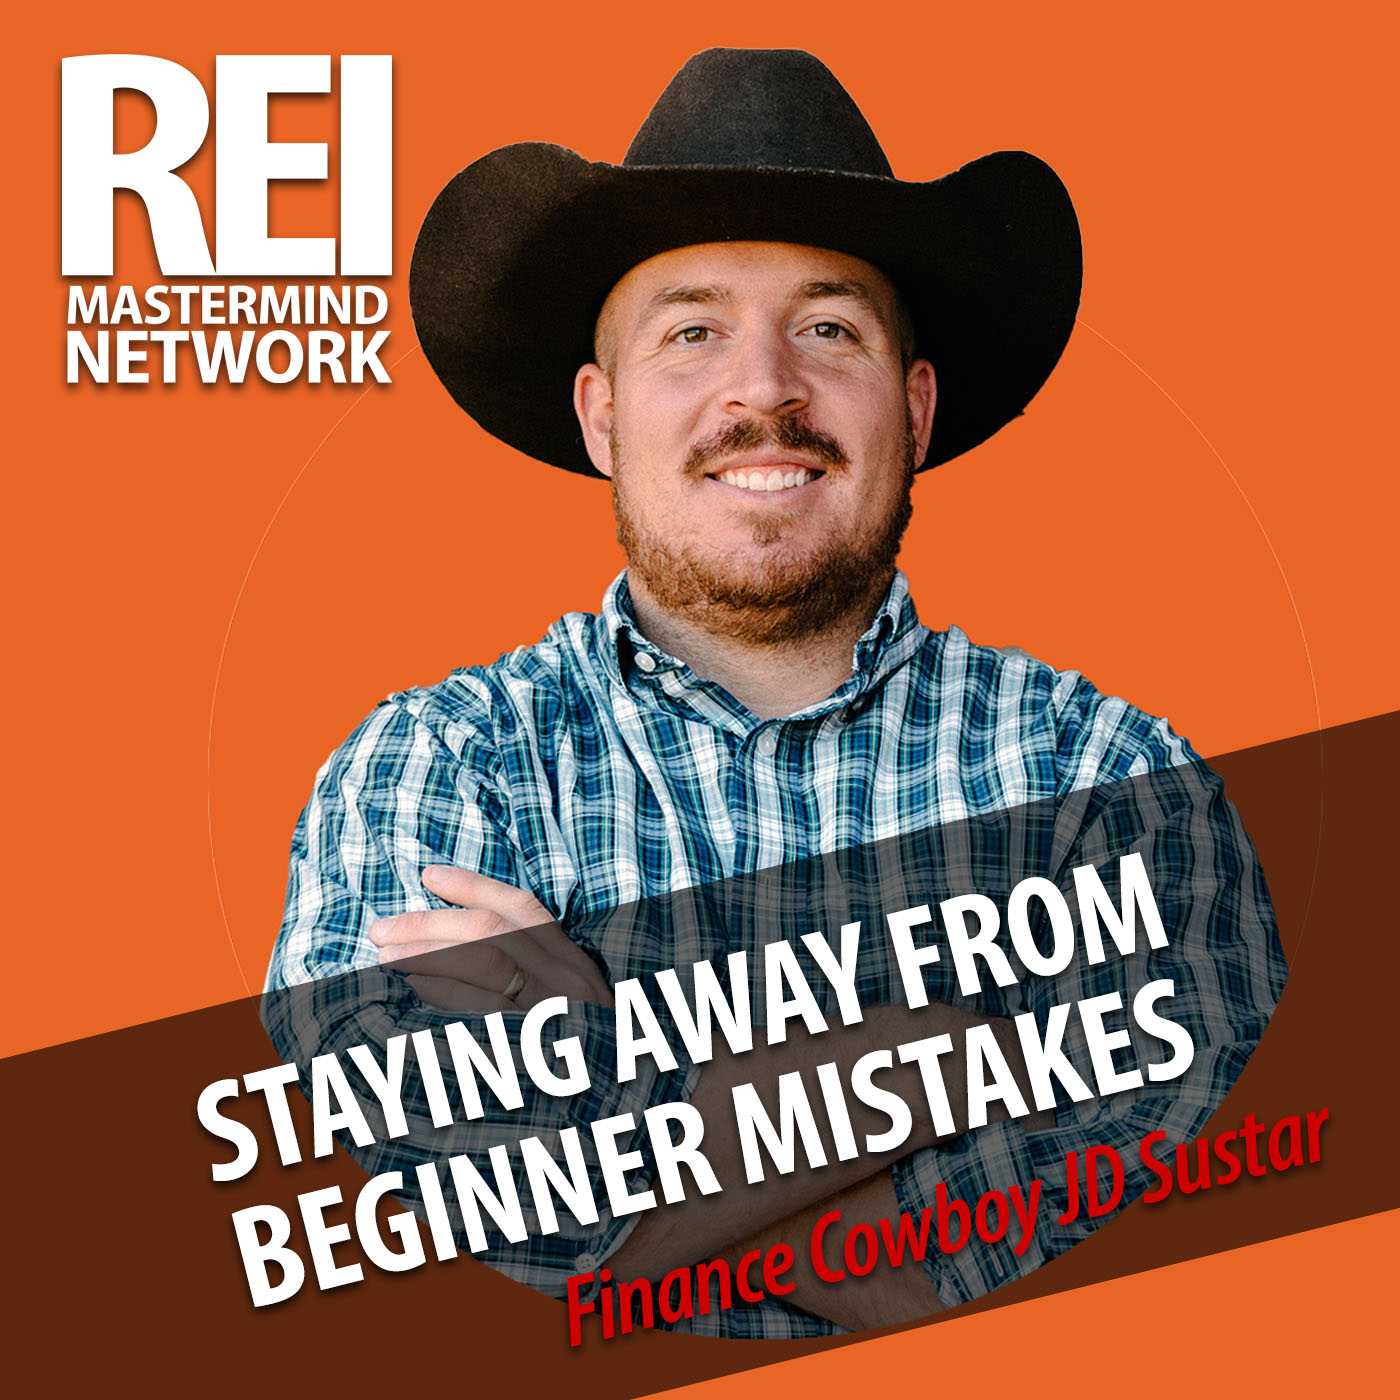 Staying Away From Beginner Mistakes with the Finance Cowboy JD Sustar